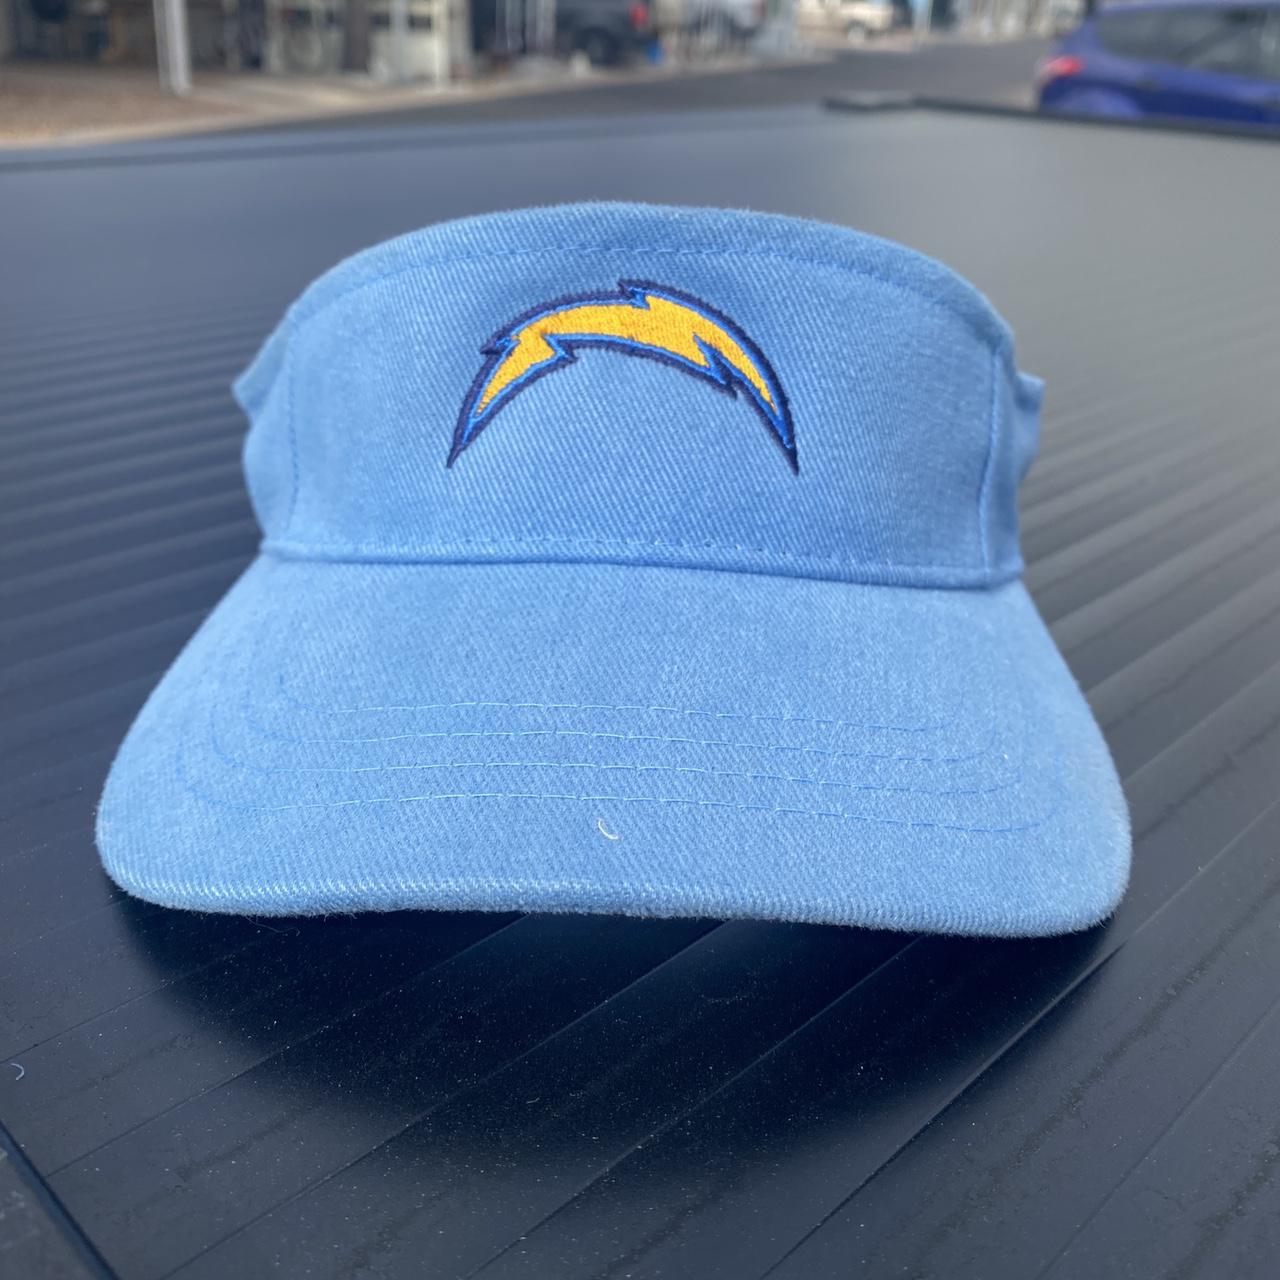 San Diego Chargers hard hat